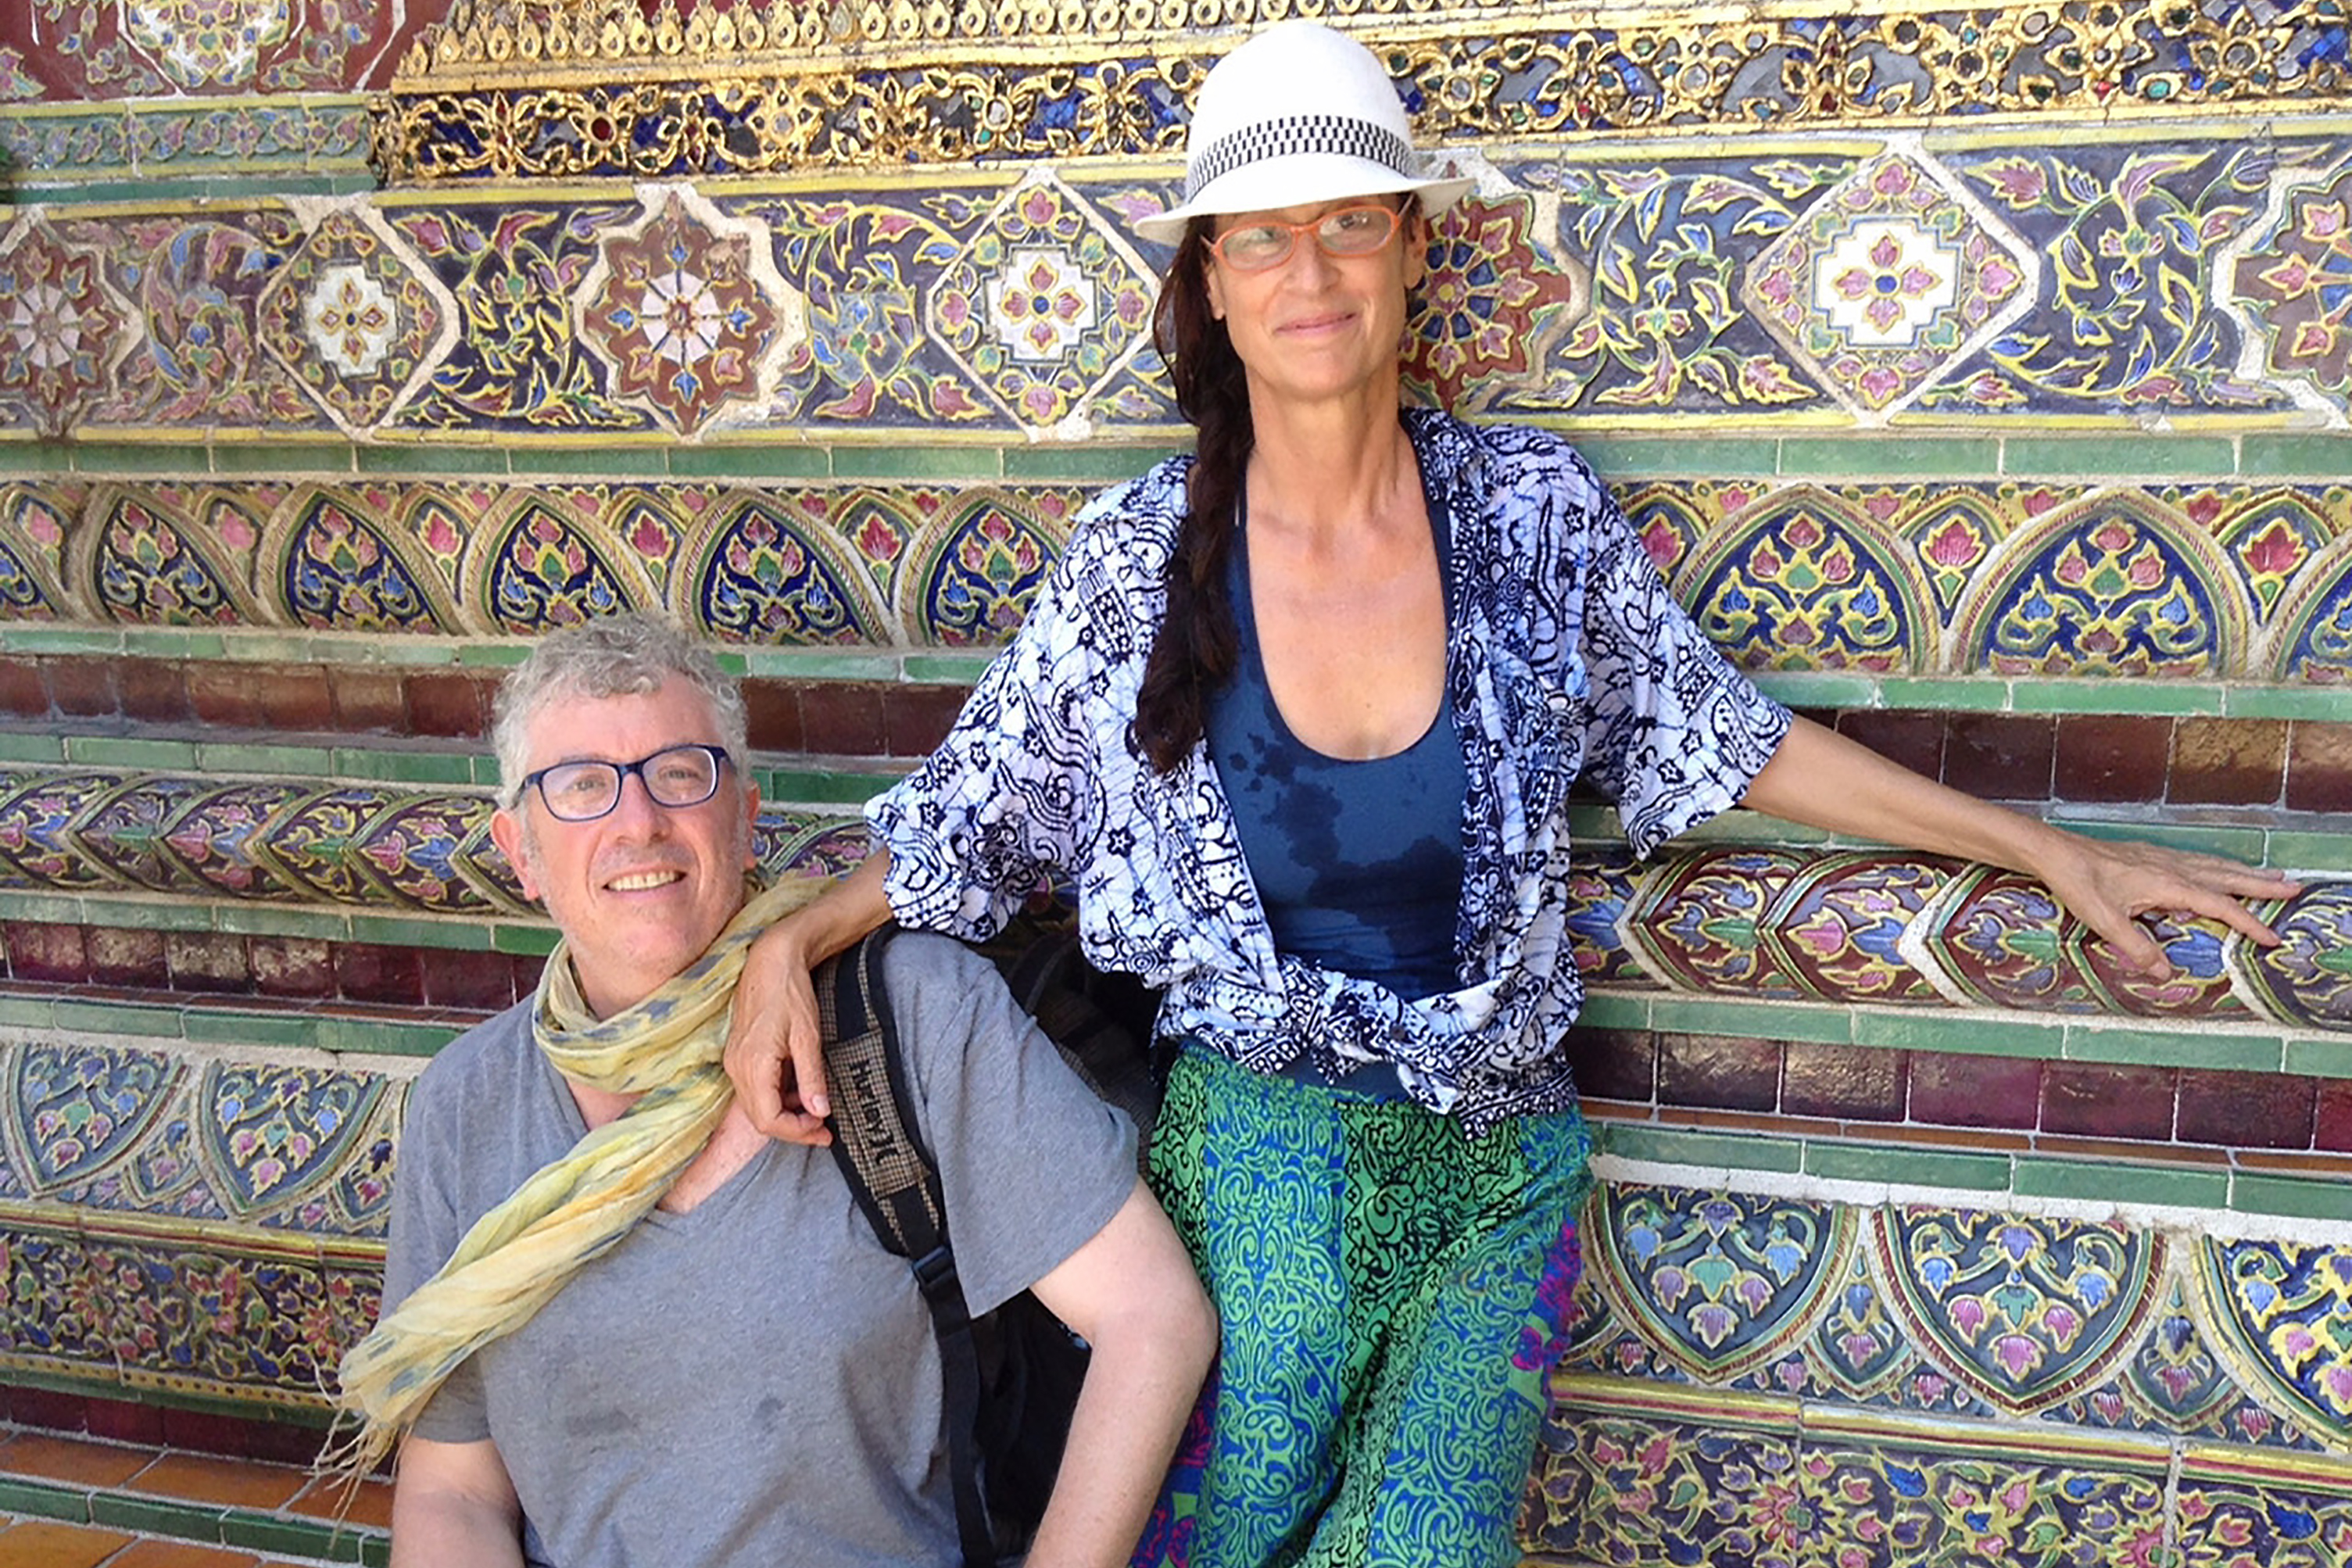 Ben and Peta standing in front of a tiled wall. Ben is wearing a gray tshirt and colorful scarf, Peta is wearing a fedora with flowy blue top and green pants.